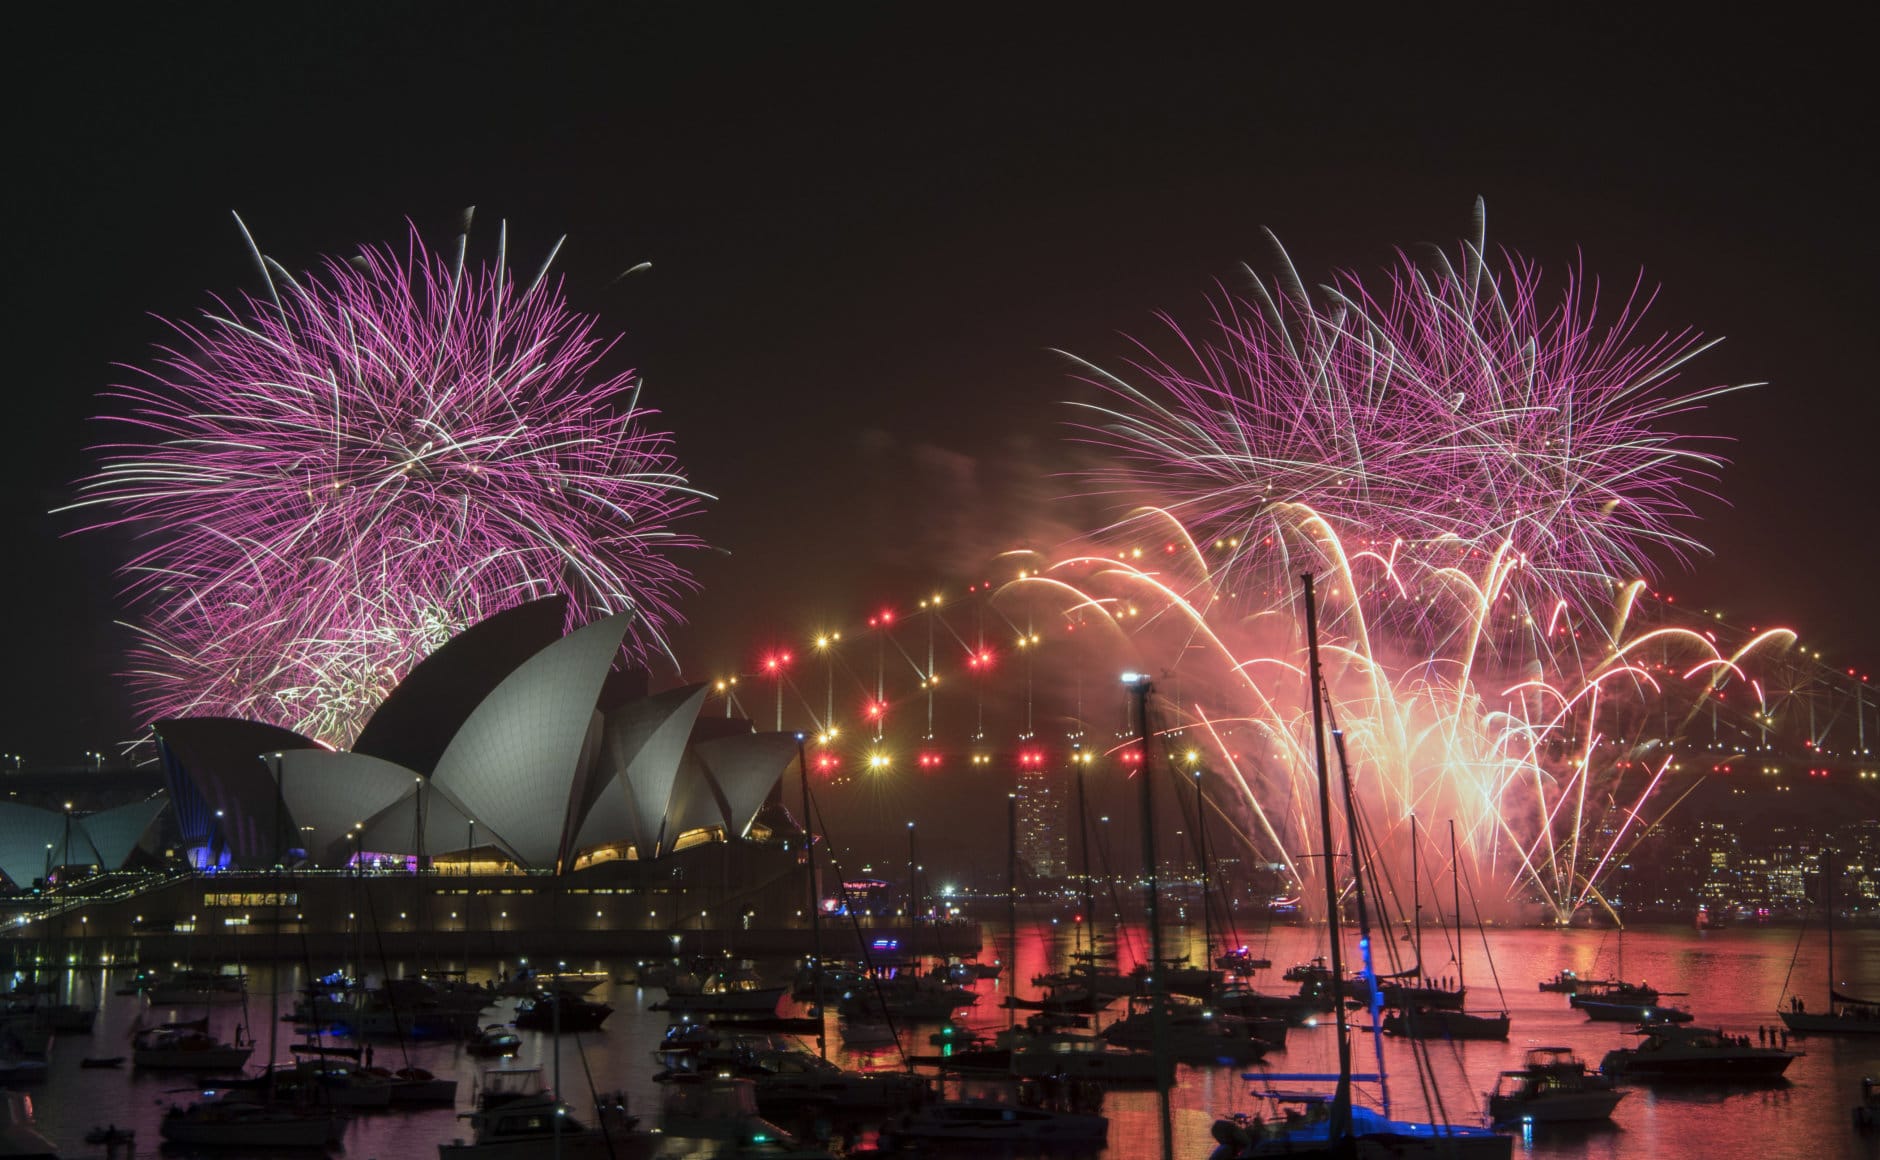 Fireworks explode over the Sydney Harbour during New Year's Eve celebrations in Sydney, Monday, Dec. 31, 2018. (Brendan Esposito/AAP via AP)